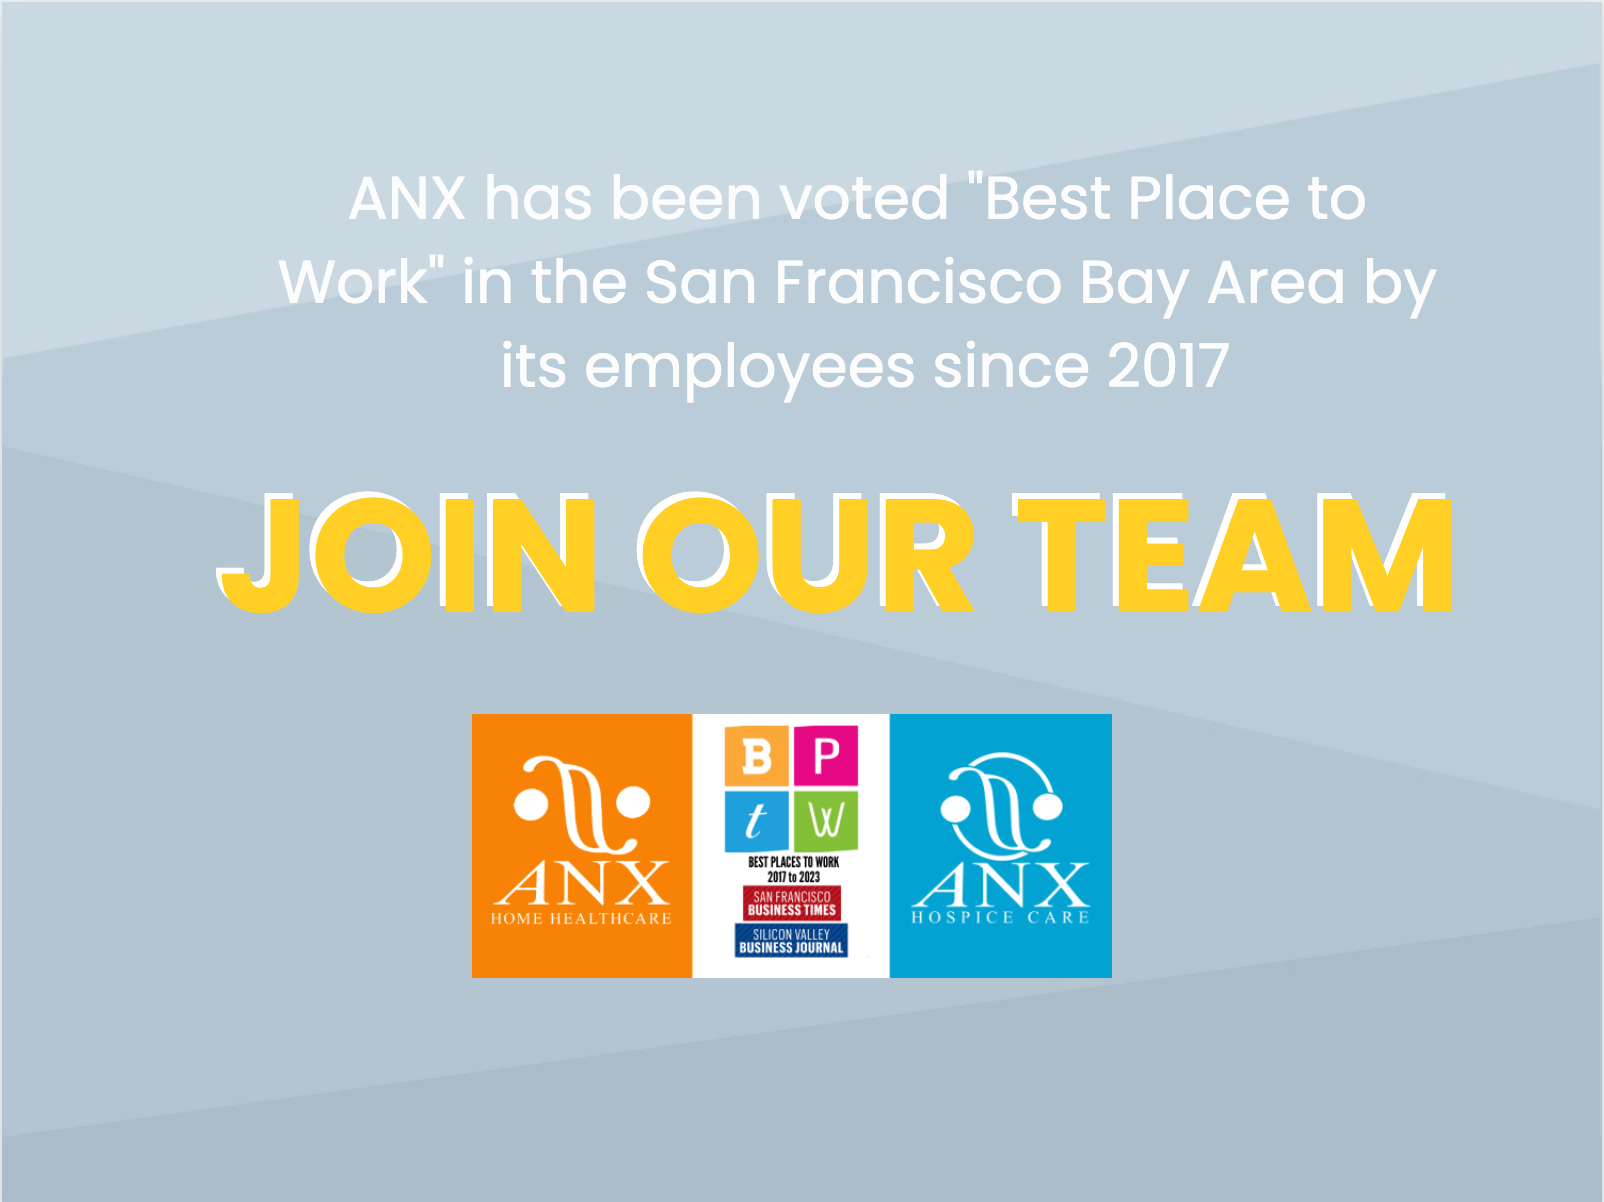 ANX Careers | Join our Team